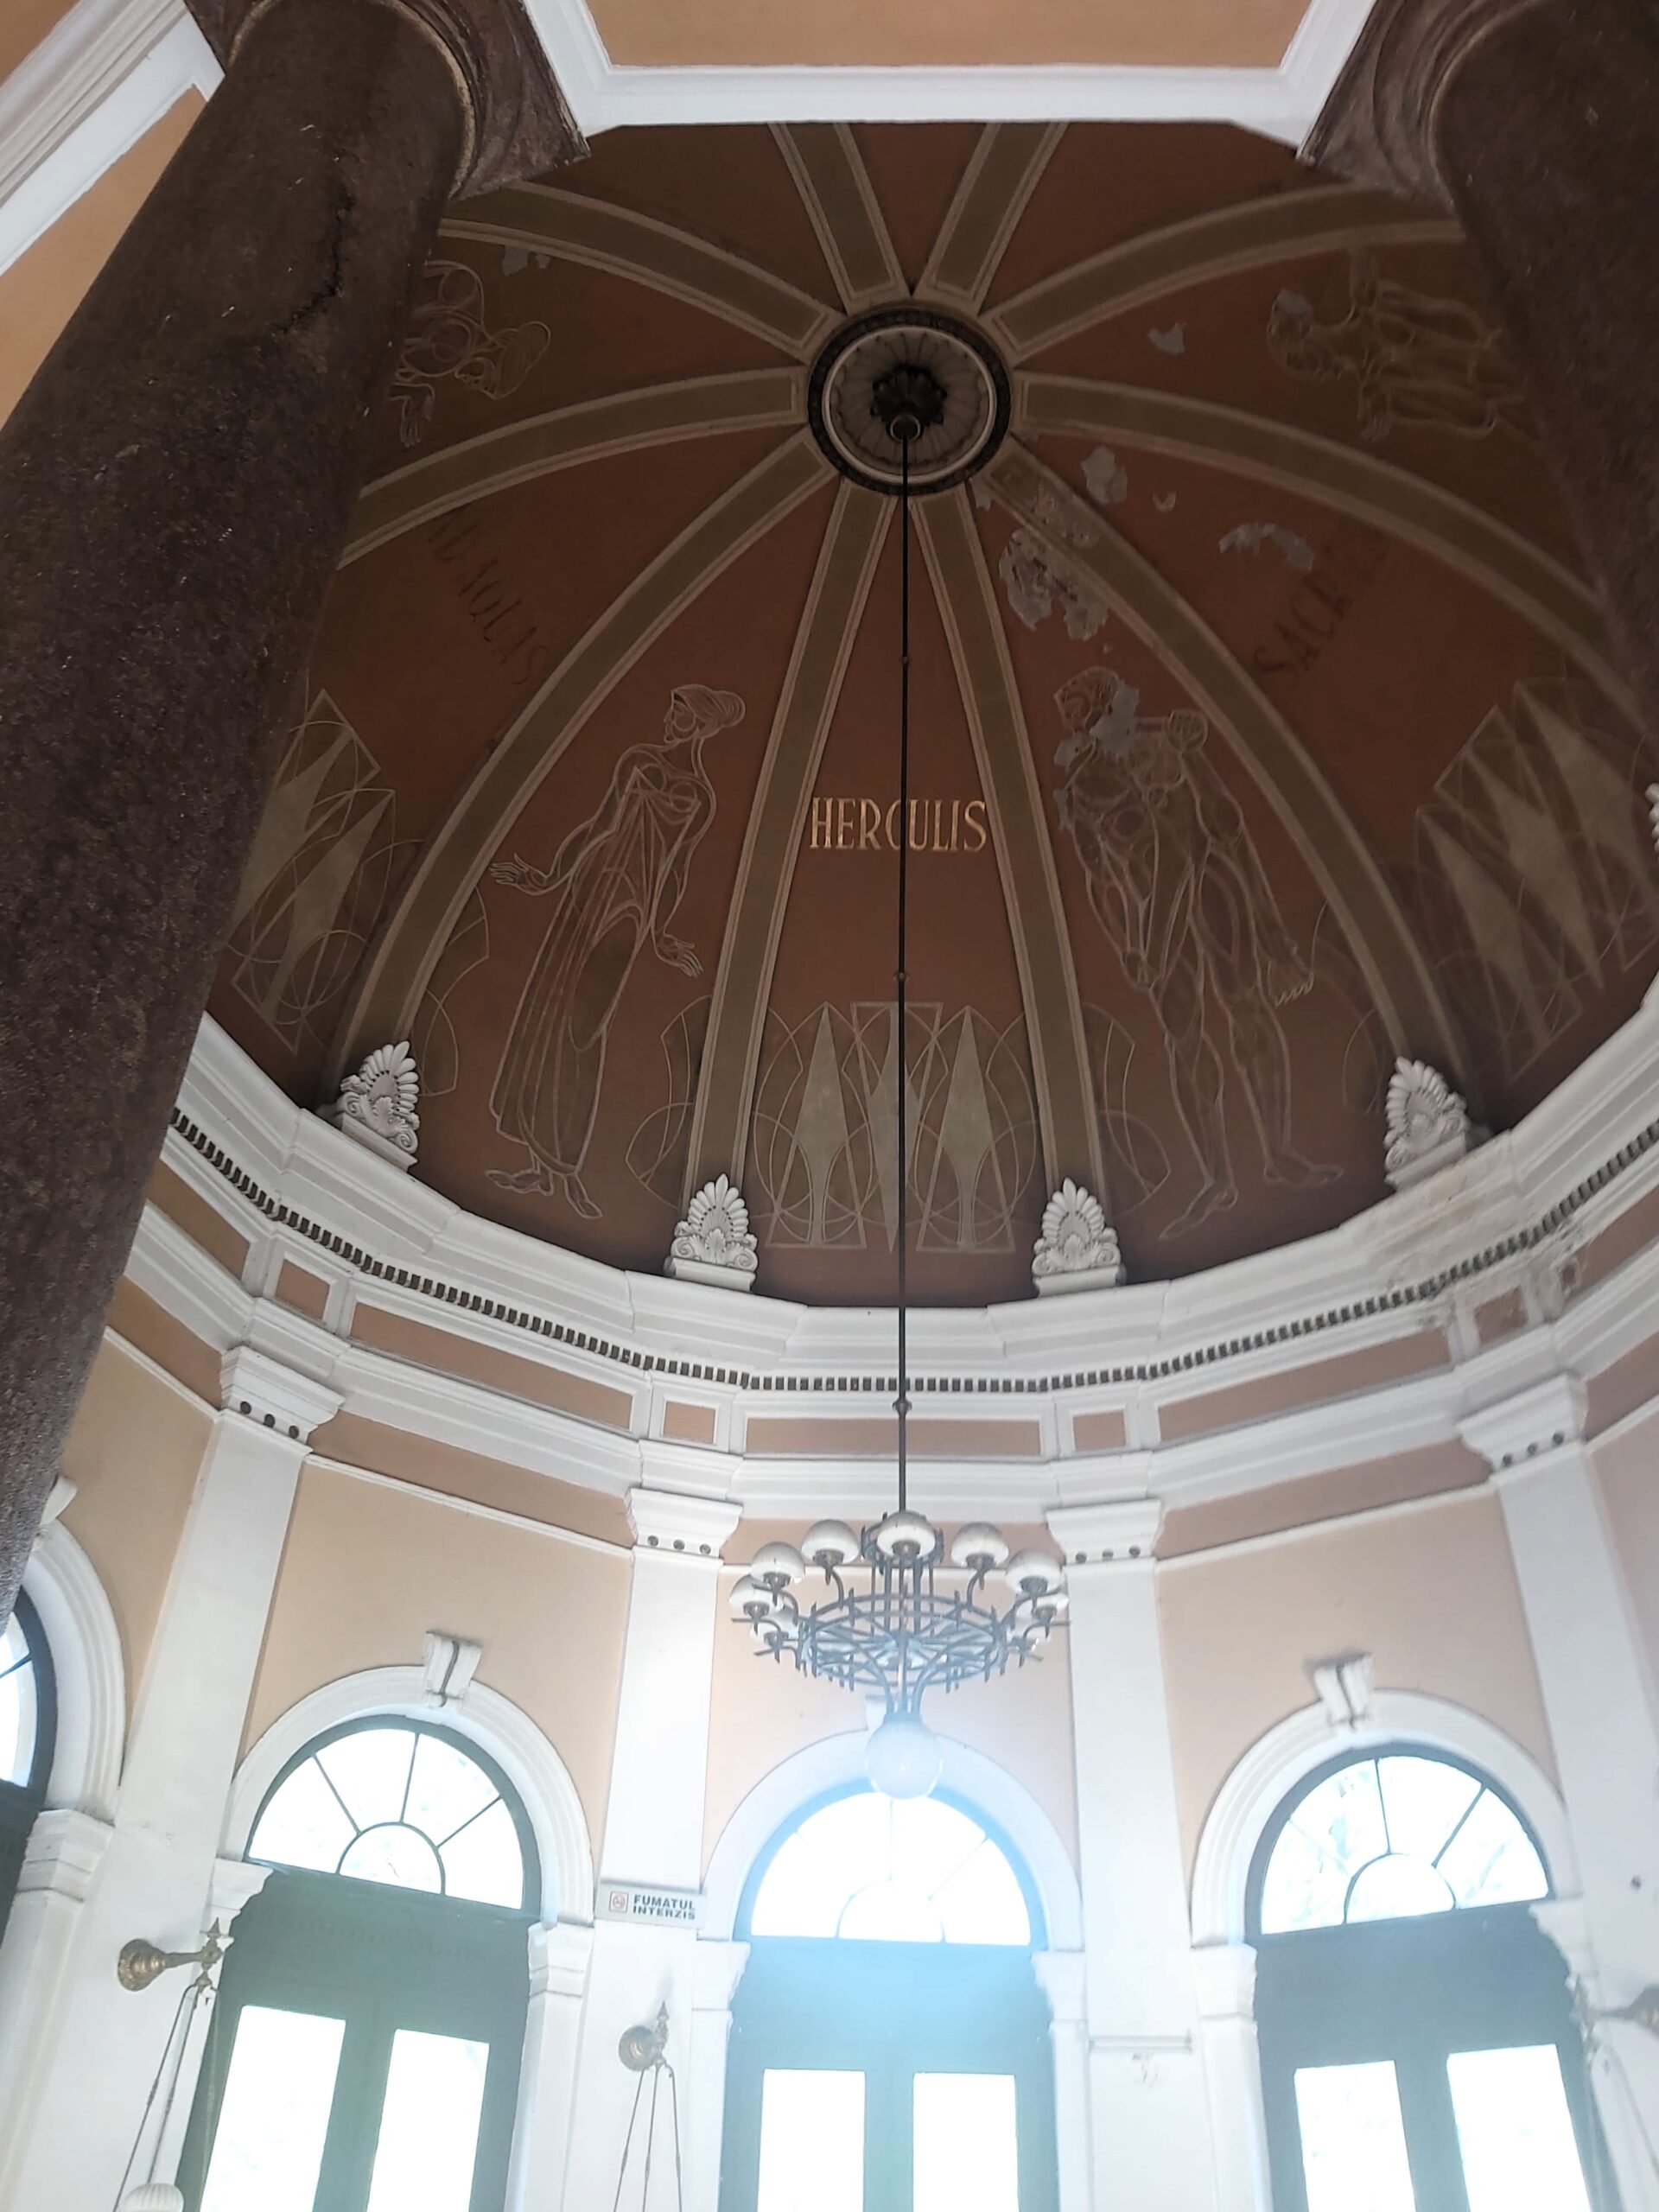 A snapshot of the domed ceiling inside Baile Herculane train station, Romania